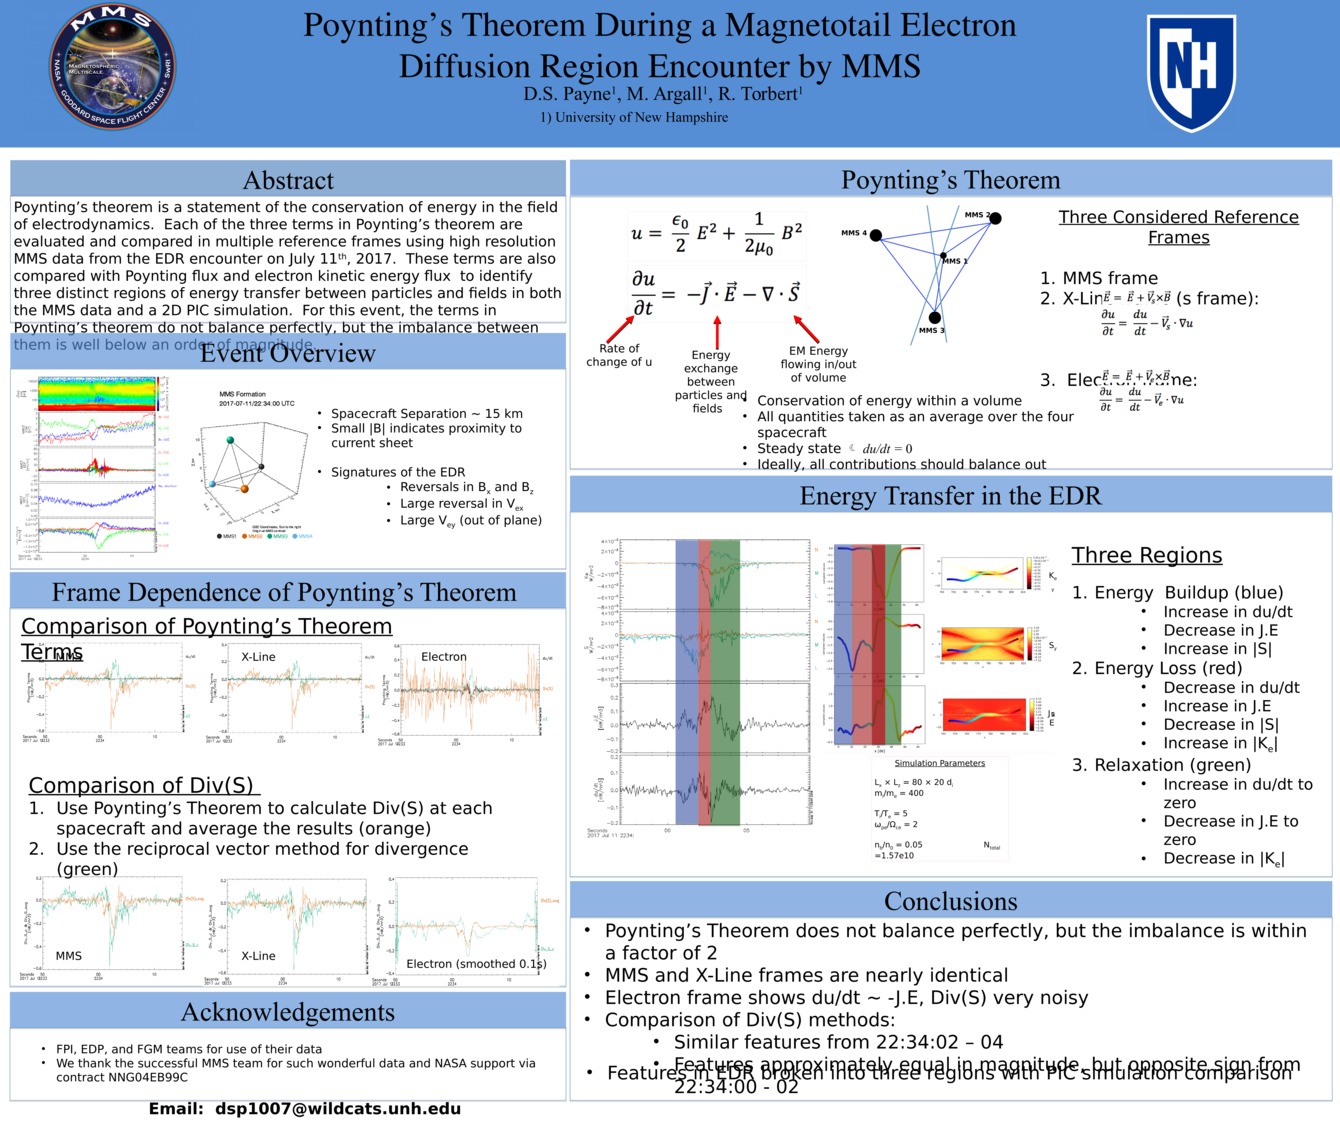 Poynting’S Theorem During A Magnetotail Electron Diffusion Region Encounter By Mms by dsp1007